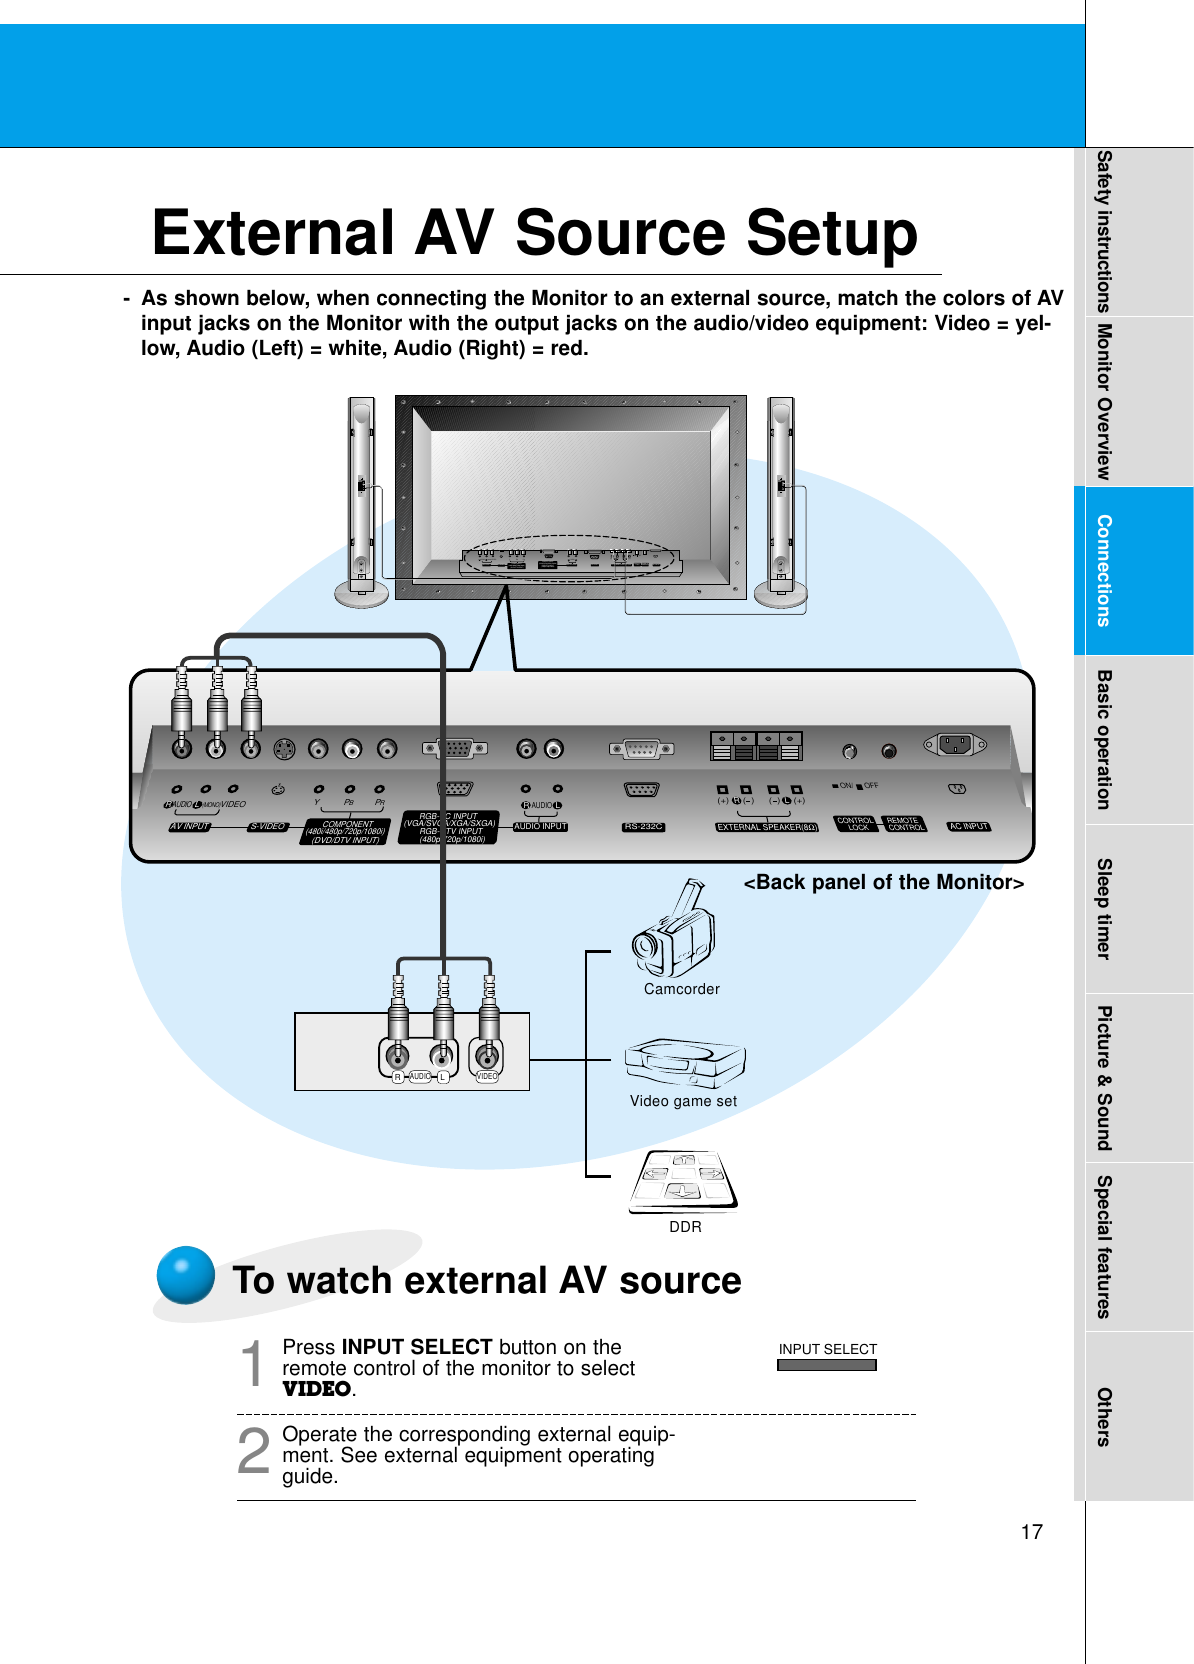 17Safety instructions Monitor Overview Connections Basic operation Sleep timer Picture &amp; Sound Special features OthersRLAUDIO VIDEO(+) (  ) (+)(  )AUDIO(MONO)RLVIDEO Y PBRPAV INPUTAUDIORL RLEXTERNAL SPEAKER (8Ω) AC INPUTAUDIO INPUTS-VIDEO COMPONENT(480i/480p/720p/1080i)RGB-PC INPUT(VGA/SVGA/XGA/SXGA)RGB-DTV INPUT(480p/720p/1080i)(DVD/DTV INPUT)(+) (  ) (+)(  )AUDIO(MONO)RLAV INPUT S-VIDEOCOMPONENT(480i/480p/720p/1080i)(DVD/DTV INPUT)RGB-PC INPUTRAUDIO INPUTEXTERNAL SPEAKER(8Ω)RLAC INPUTLAUDIO(VGA/SVGA/XGA/SXGA)RGB-DTV INPUT(480p/720p/1080i)VIDEO YPBPRCamcorderVideo game setDDRRS-232CRS-232CCONTROLLOCK REMOTECONTROLREMOTECONTROLCONTROLLOCKON/ OFFON/ OFFTo watch external AV sourcePress INPUT SELECT button on theremote control of the monitor to selectVIDEO.1Operate the corresponding external equip-ment. See external equipment operatingguide.2External AV Source Setup- As shown below, when connecting the Monitor to an external source, match the colors of AVinput jacks on the Monitor with the output jacks on the audio/video equipment: Video = yel-low, Audio (Left) = white, Audio (Right) = red.&lt;Back panel of the Monitor&gt;INPUT SELECT